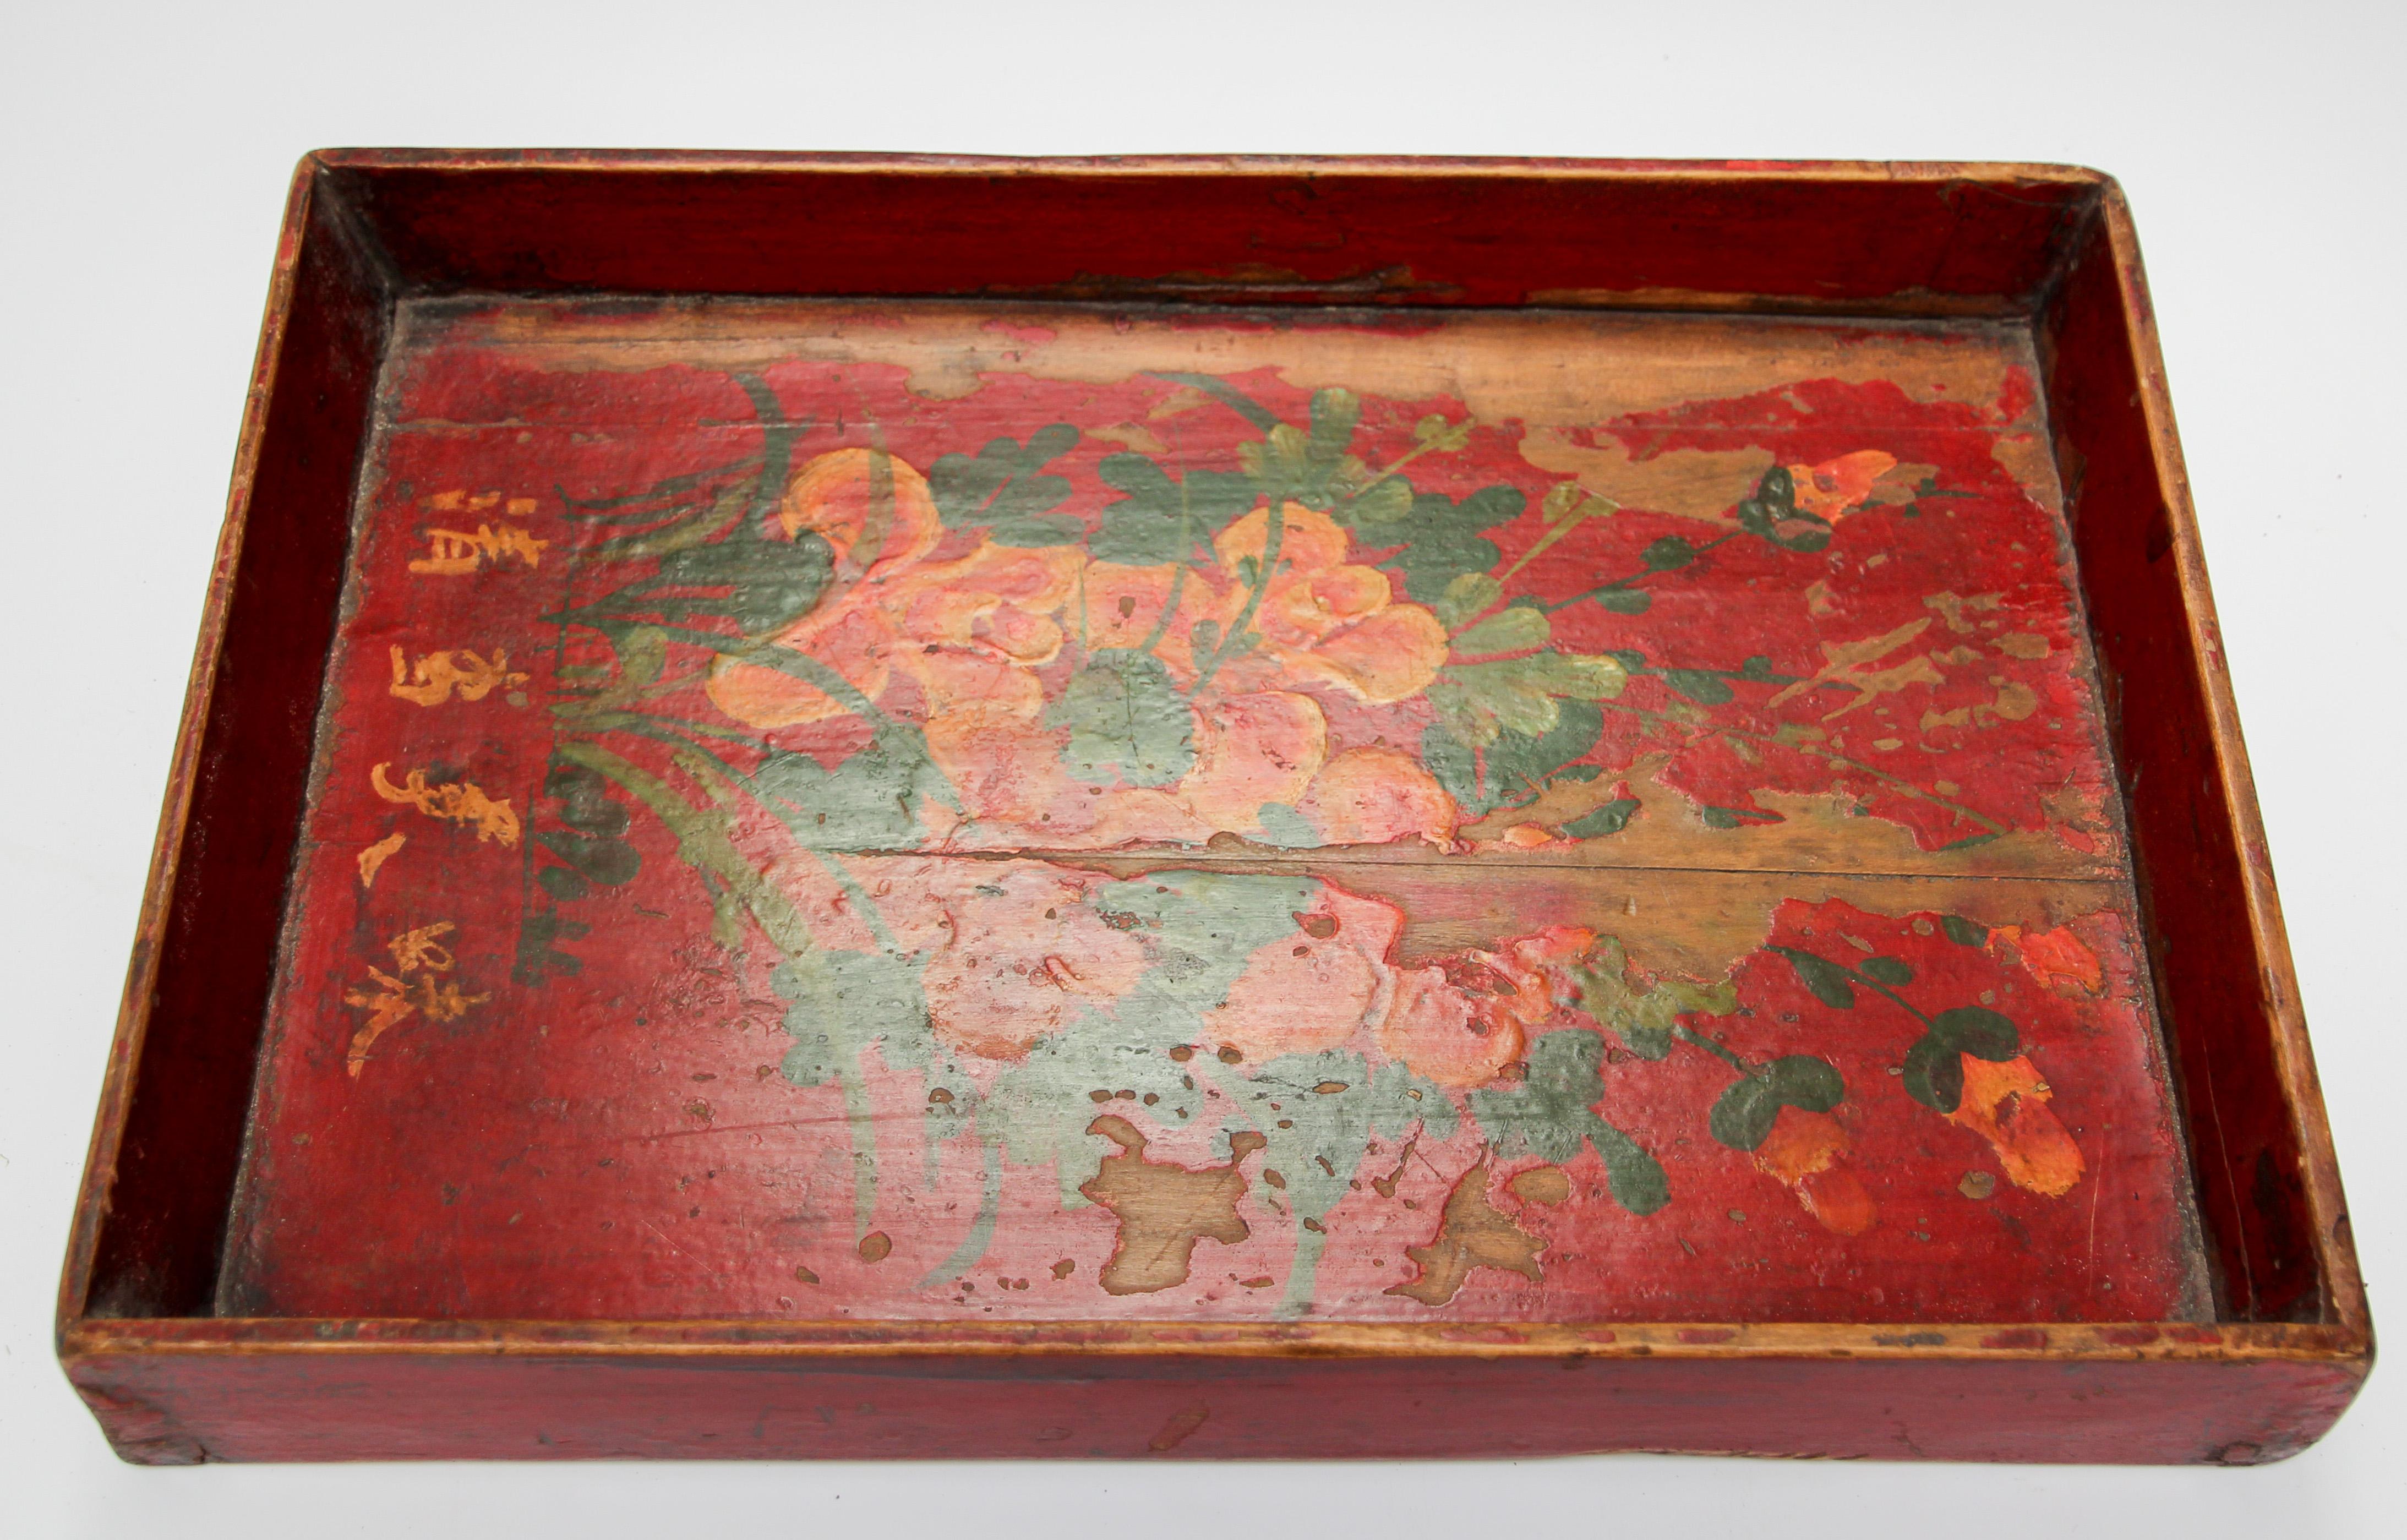 Late 19th century antique wood serving tray hand painted with flowers on red background.
Worn paint and great patina with floral painted design in red and yellow and green with Chinese calligraphy writing.
Well constructed and still strong and